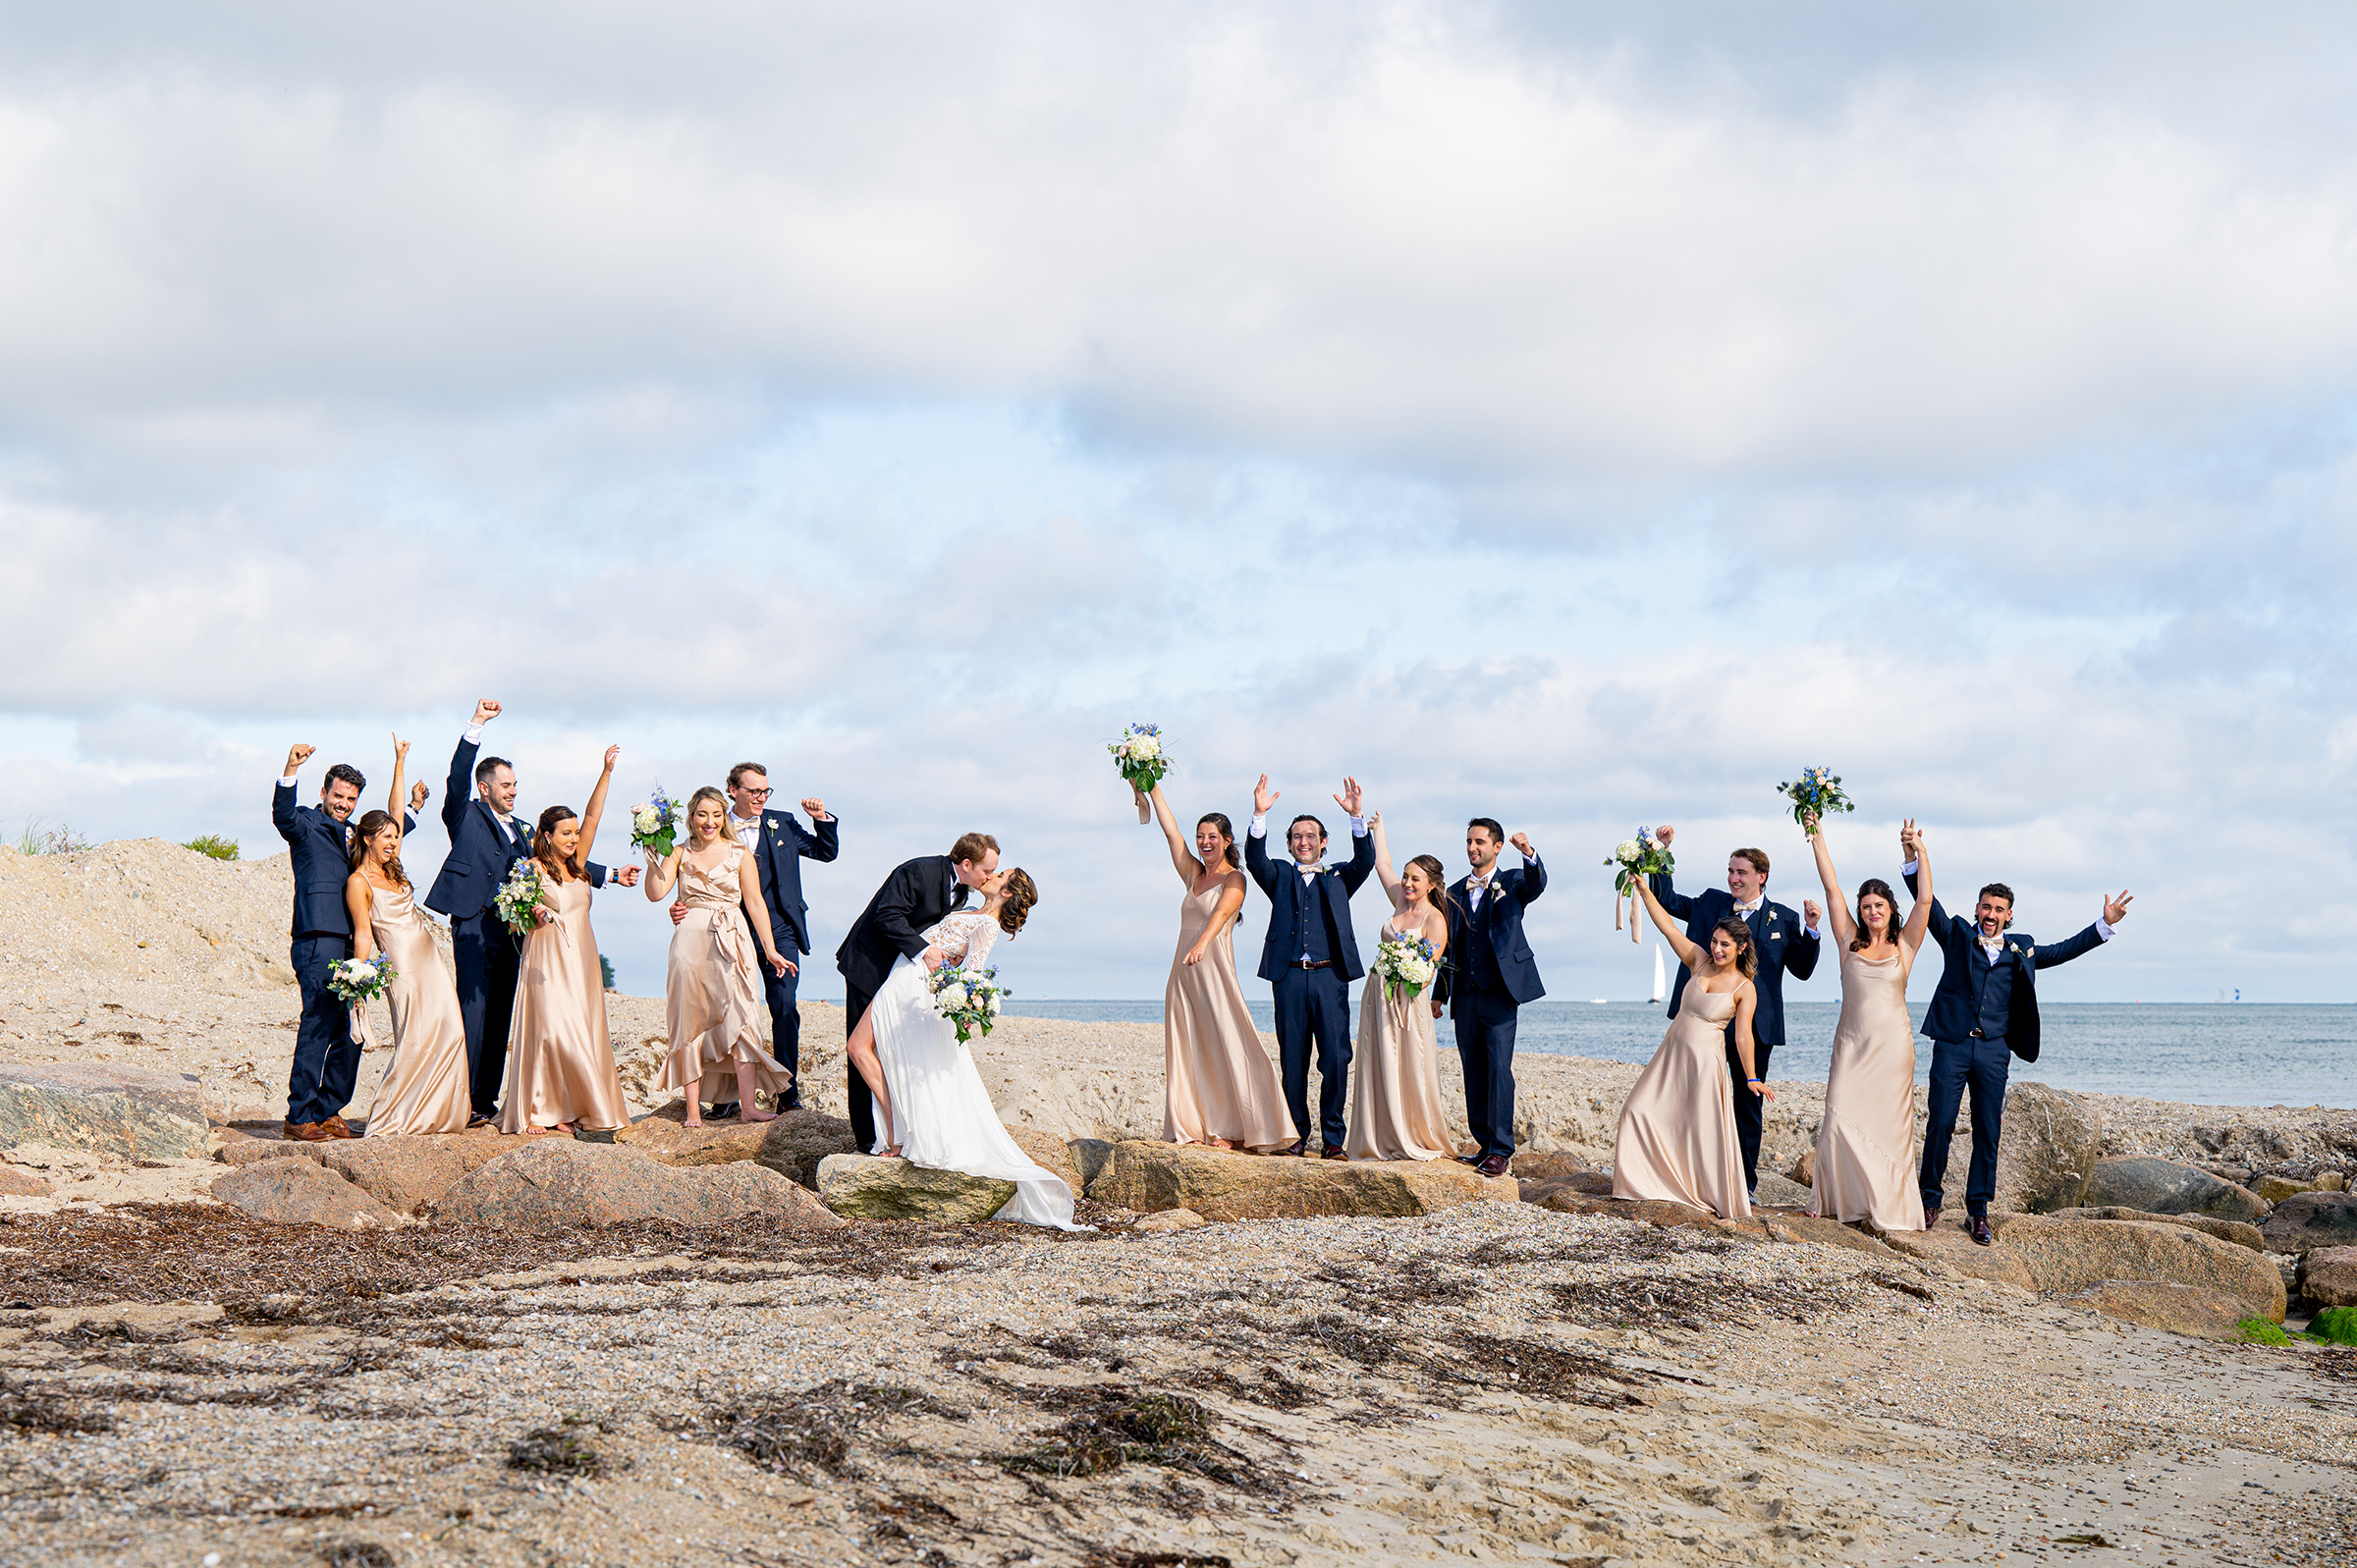 Cape Cod wedding party on beach cheering well the bride and groom kiss.